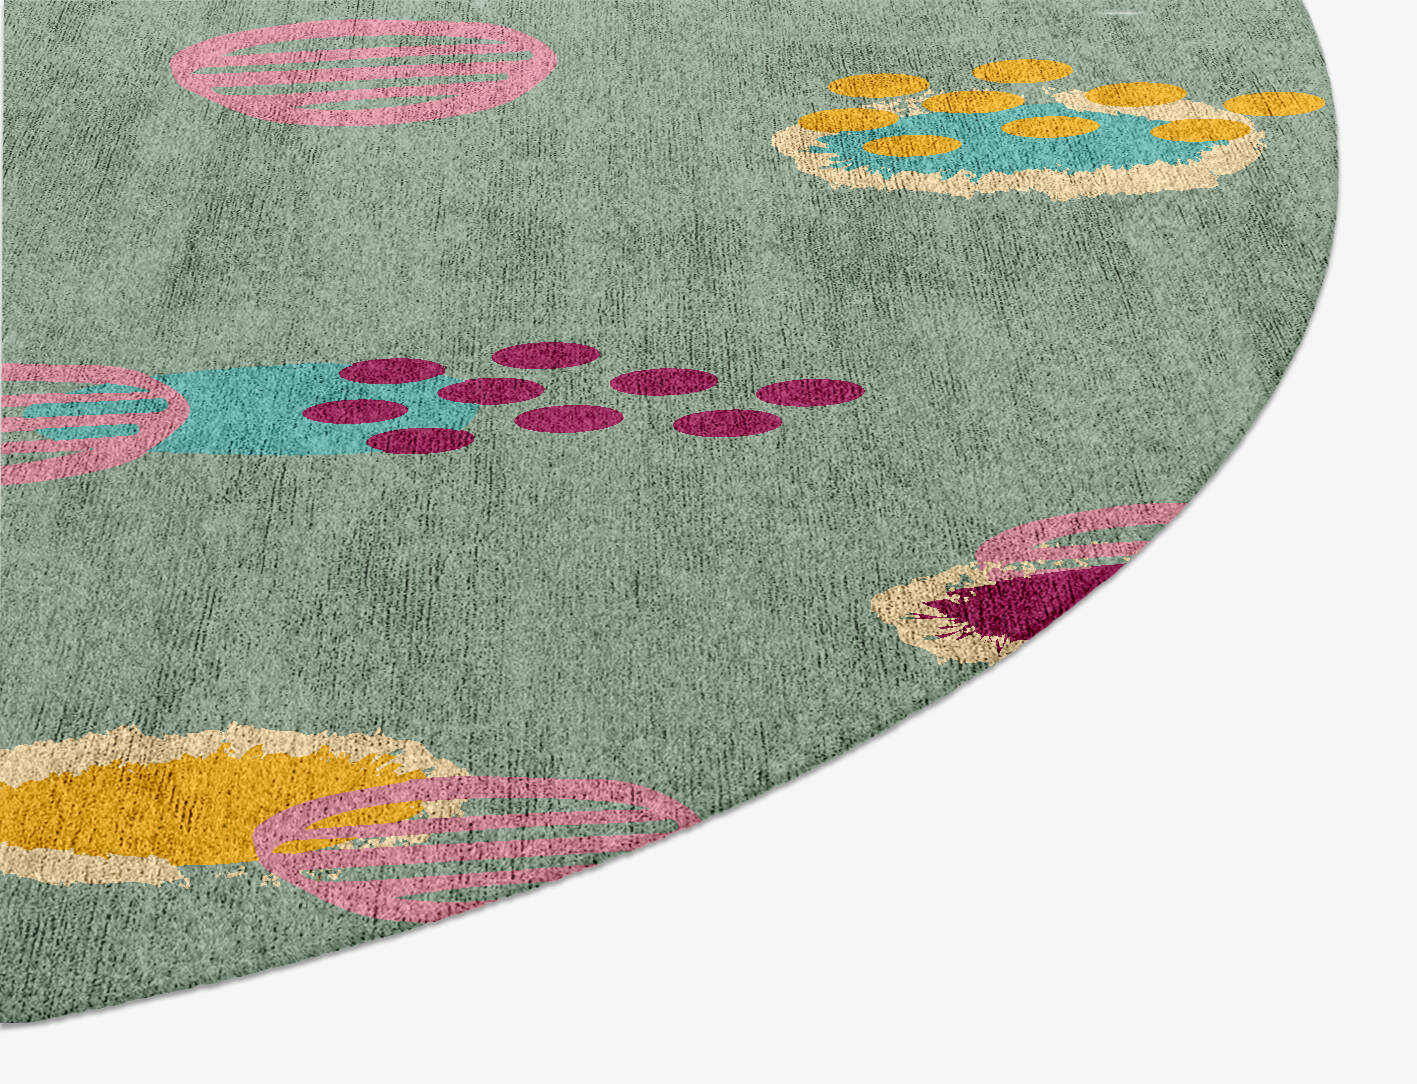 Colour Prints Kids Oval Hand Knotted Bamboo Silk Custom Rug by Rug Artisan